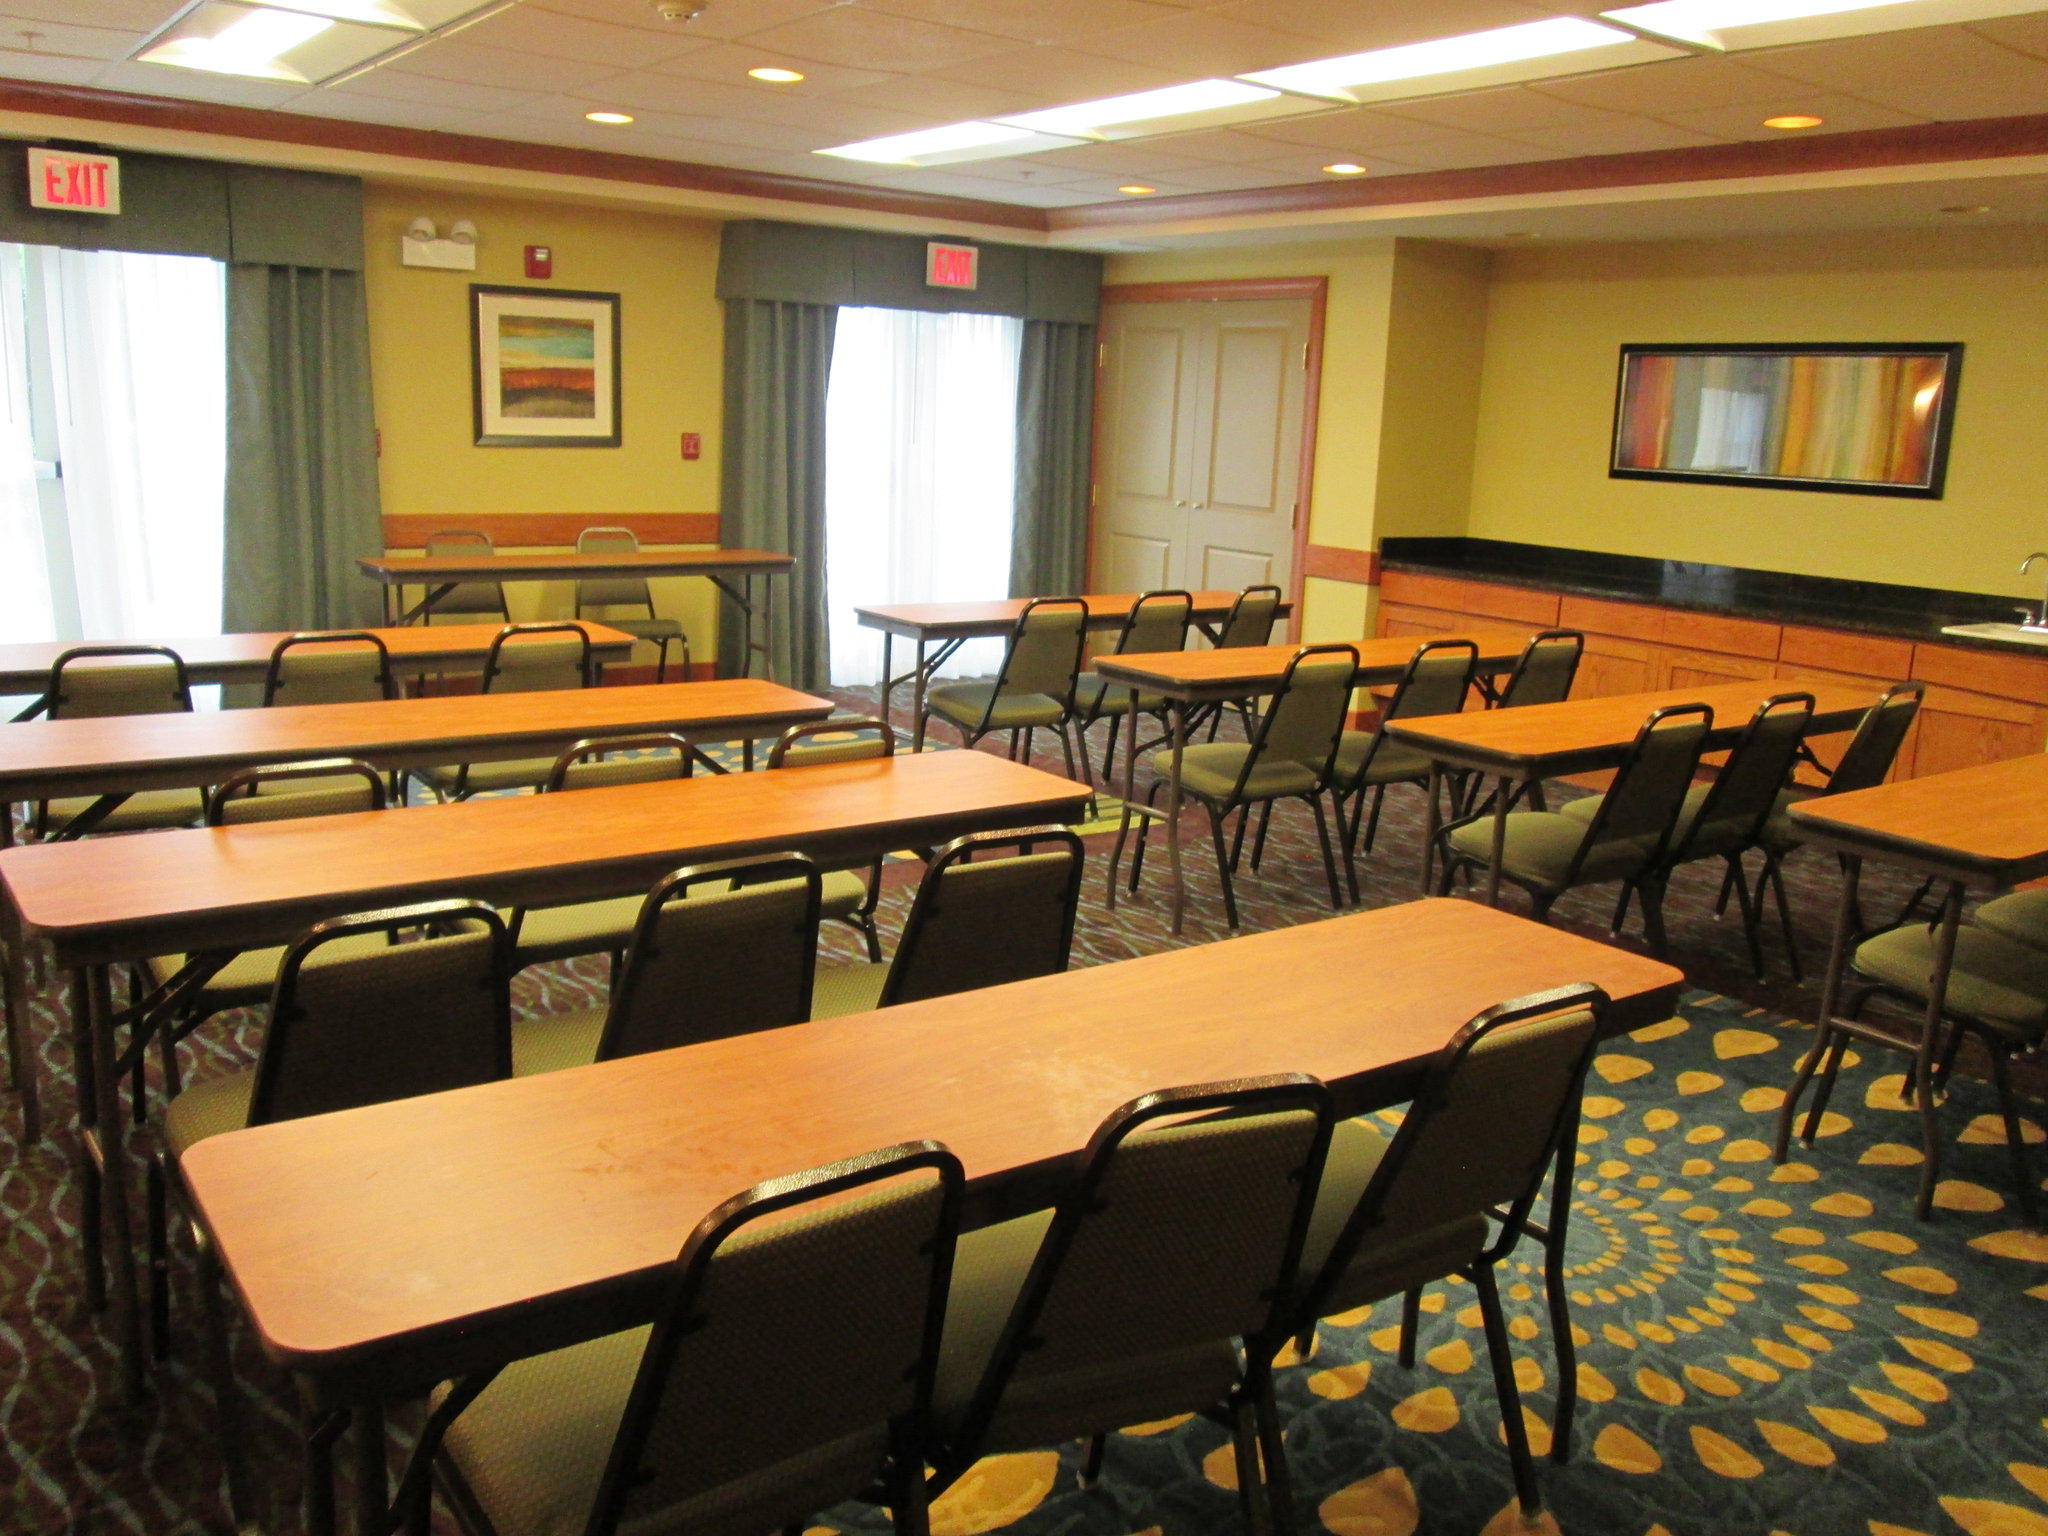 Holiday Inn Express & Suites Chicago West-Roselle Photo